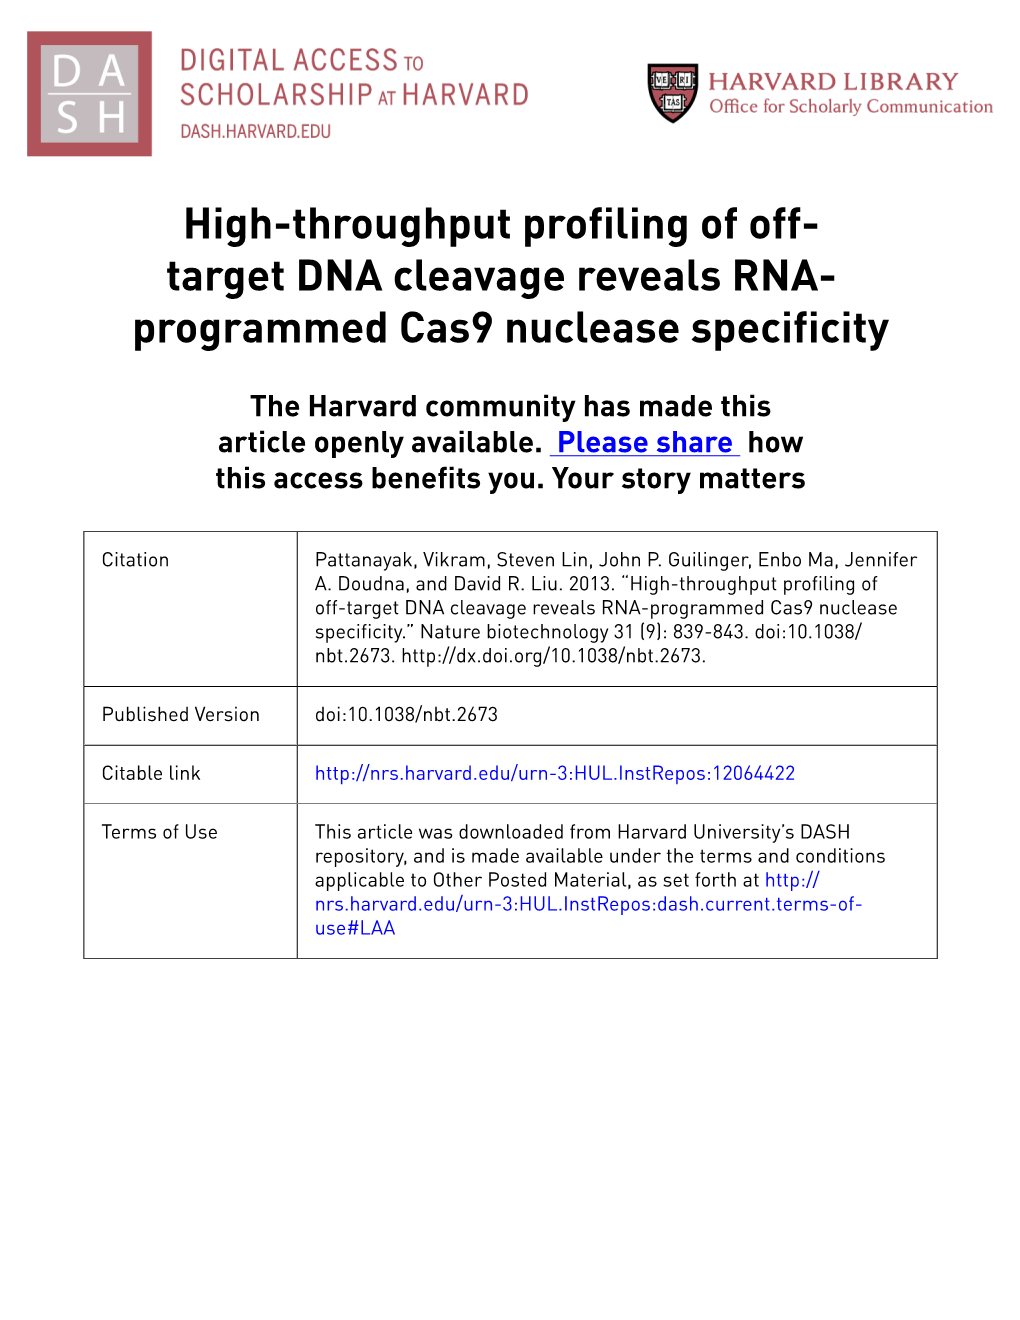 High-Throughput Profiling of Off- Target DNA Cleavage Reveals RNA- Programmed Cas9 Nuclease Specificity